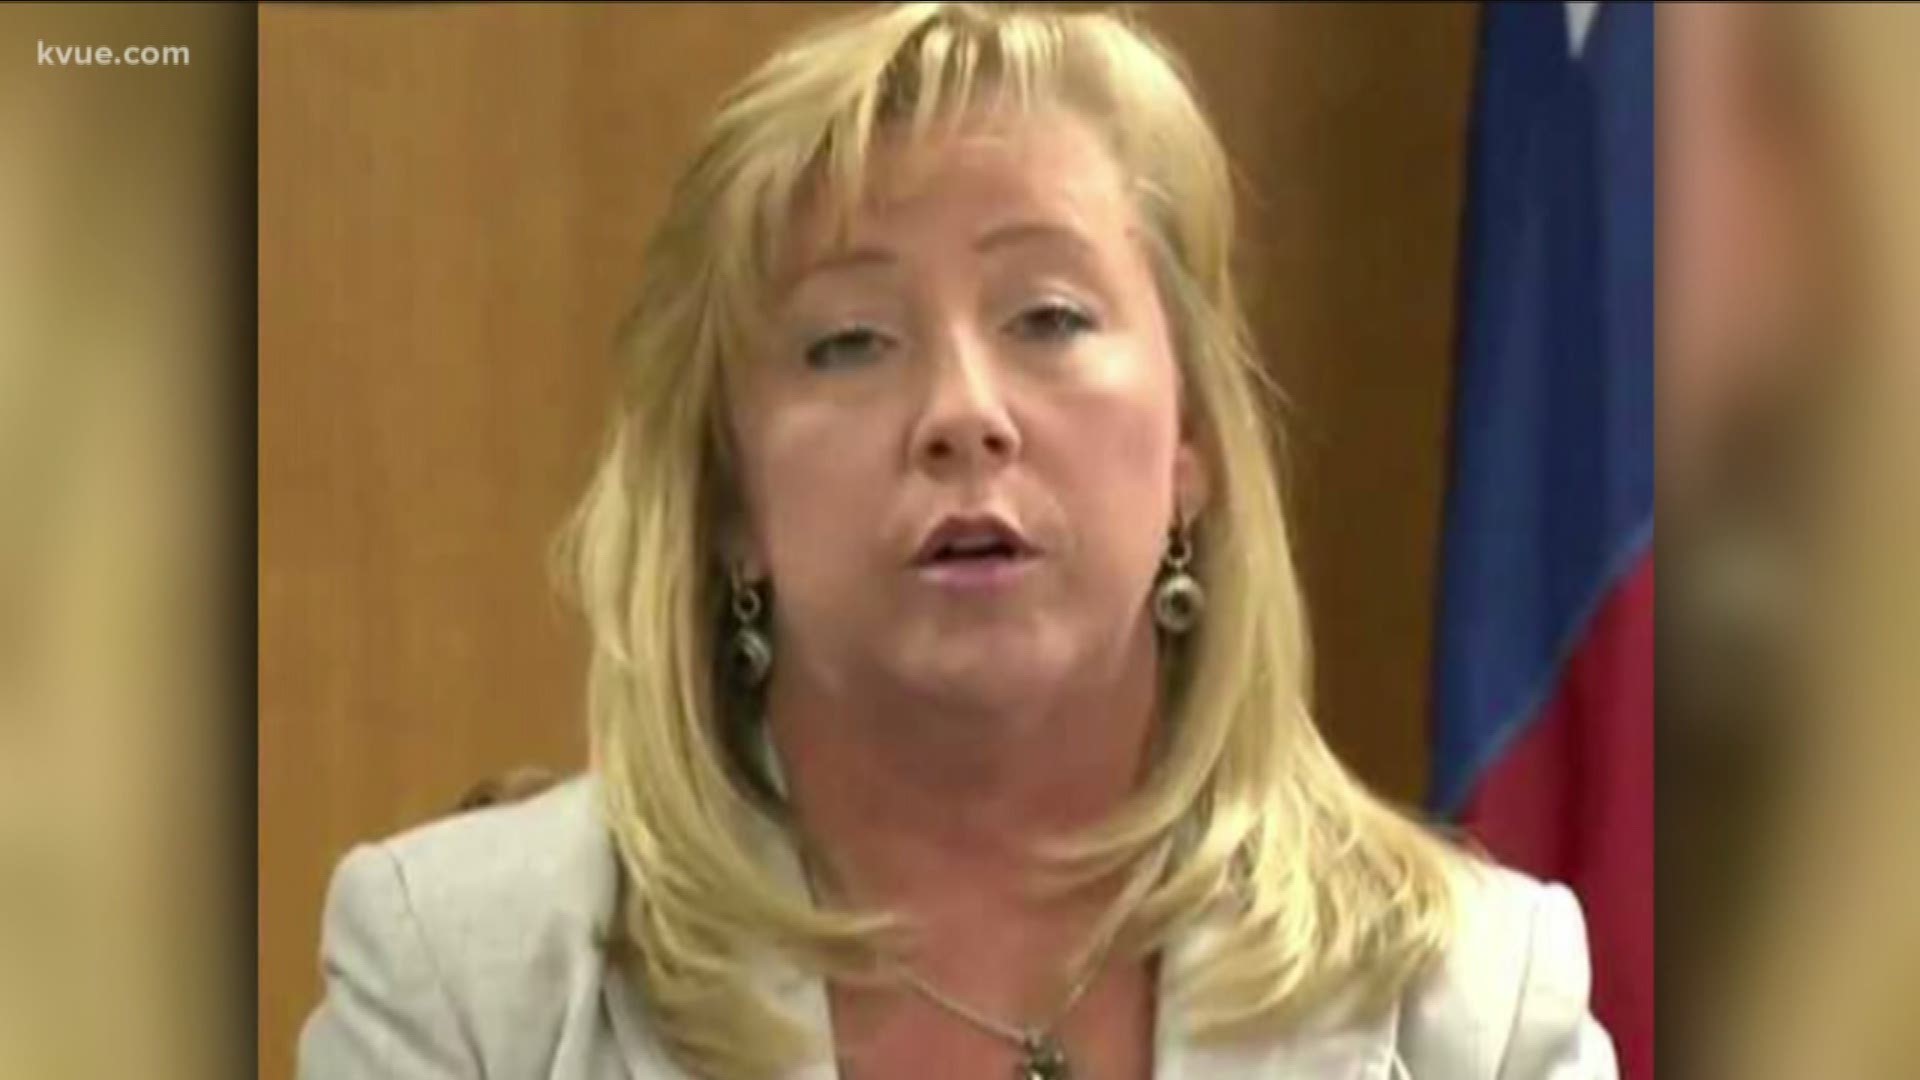 The Texas Rangers are investigating the death of former Williamson County District Attorney Jana Duty. Someone reportedly found her body in a condo complex in Rockport, Texas.